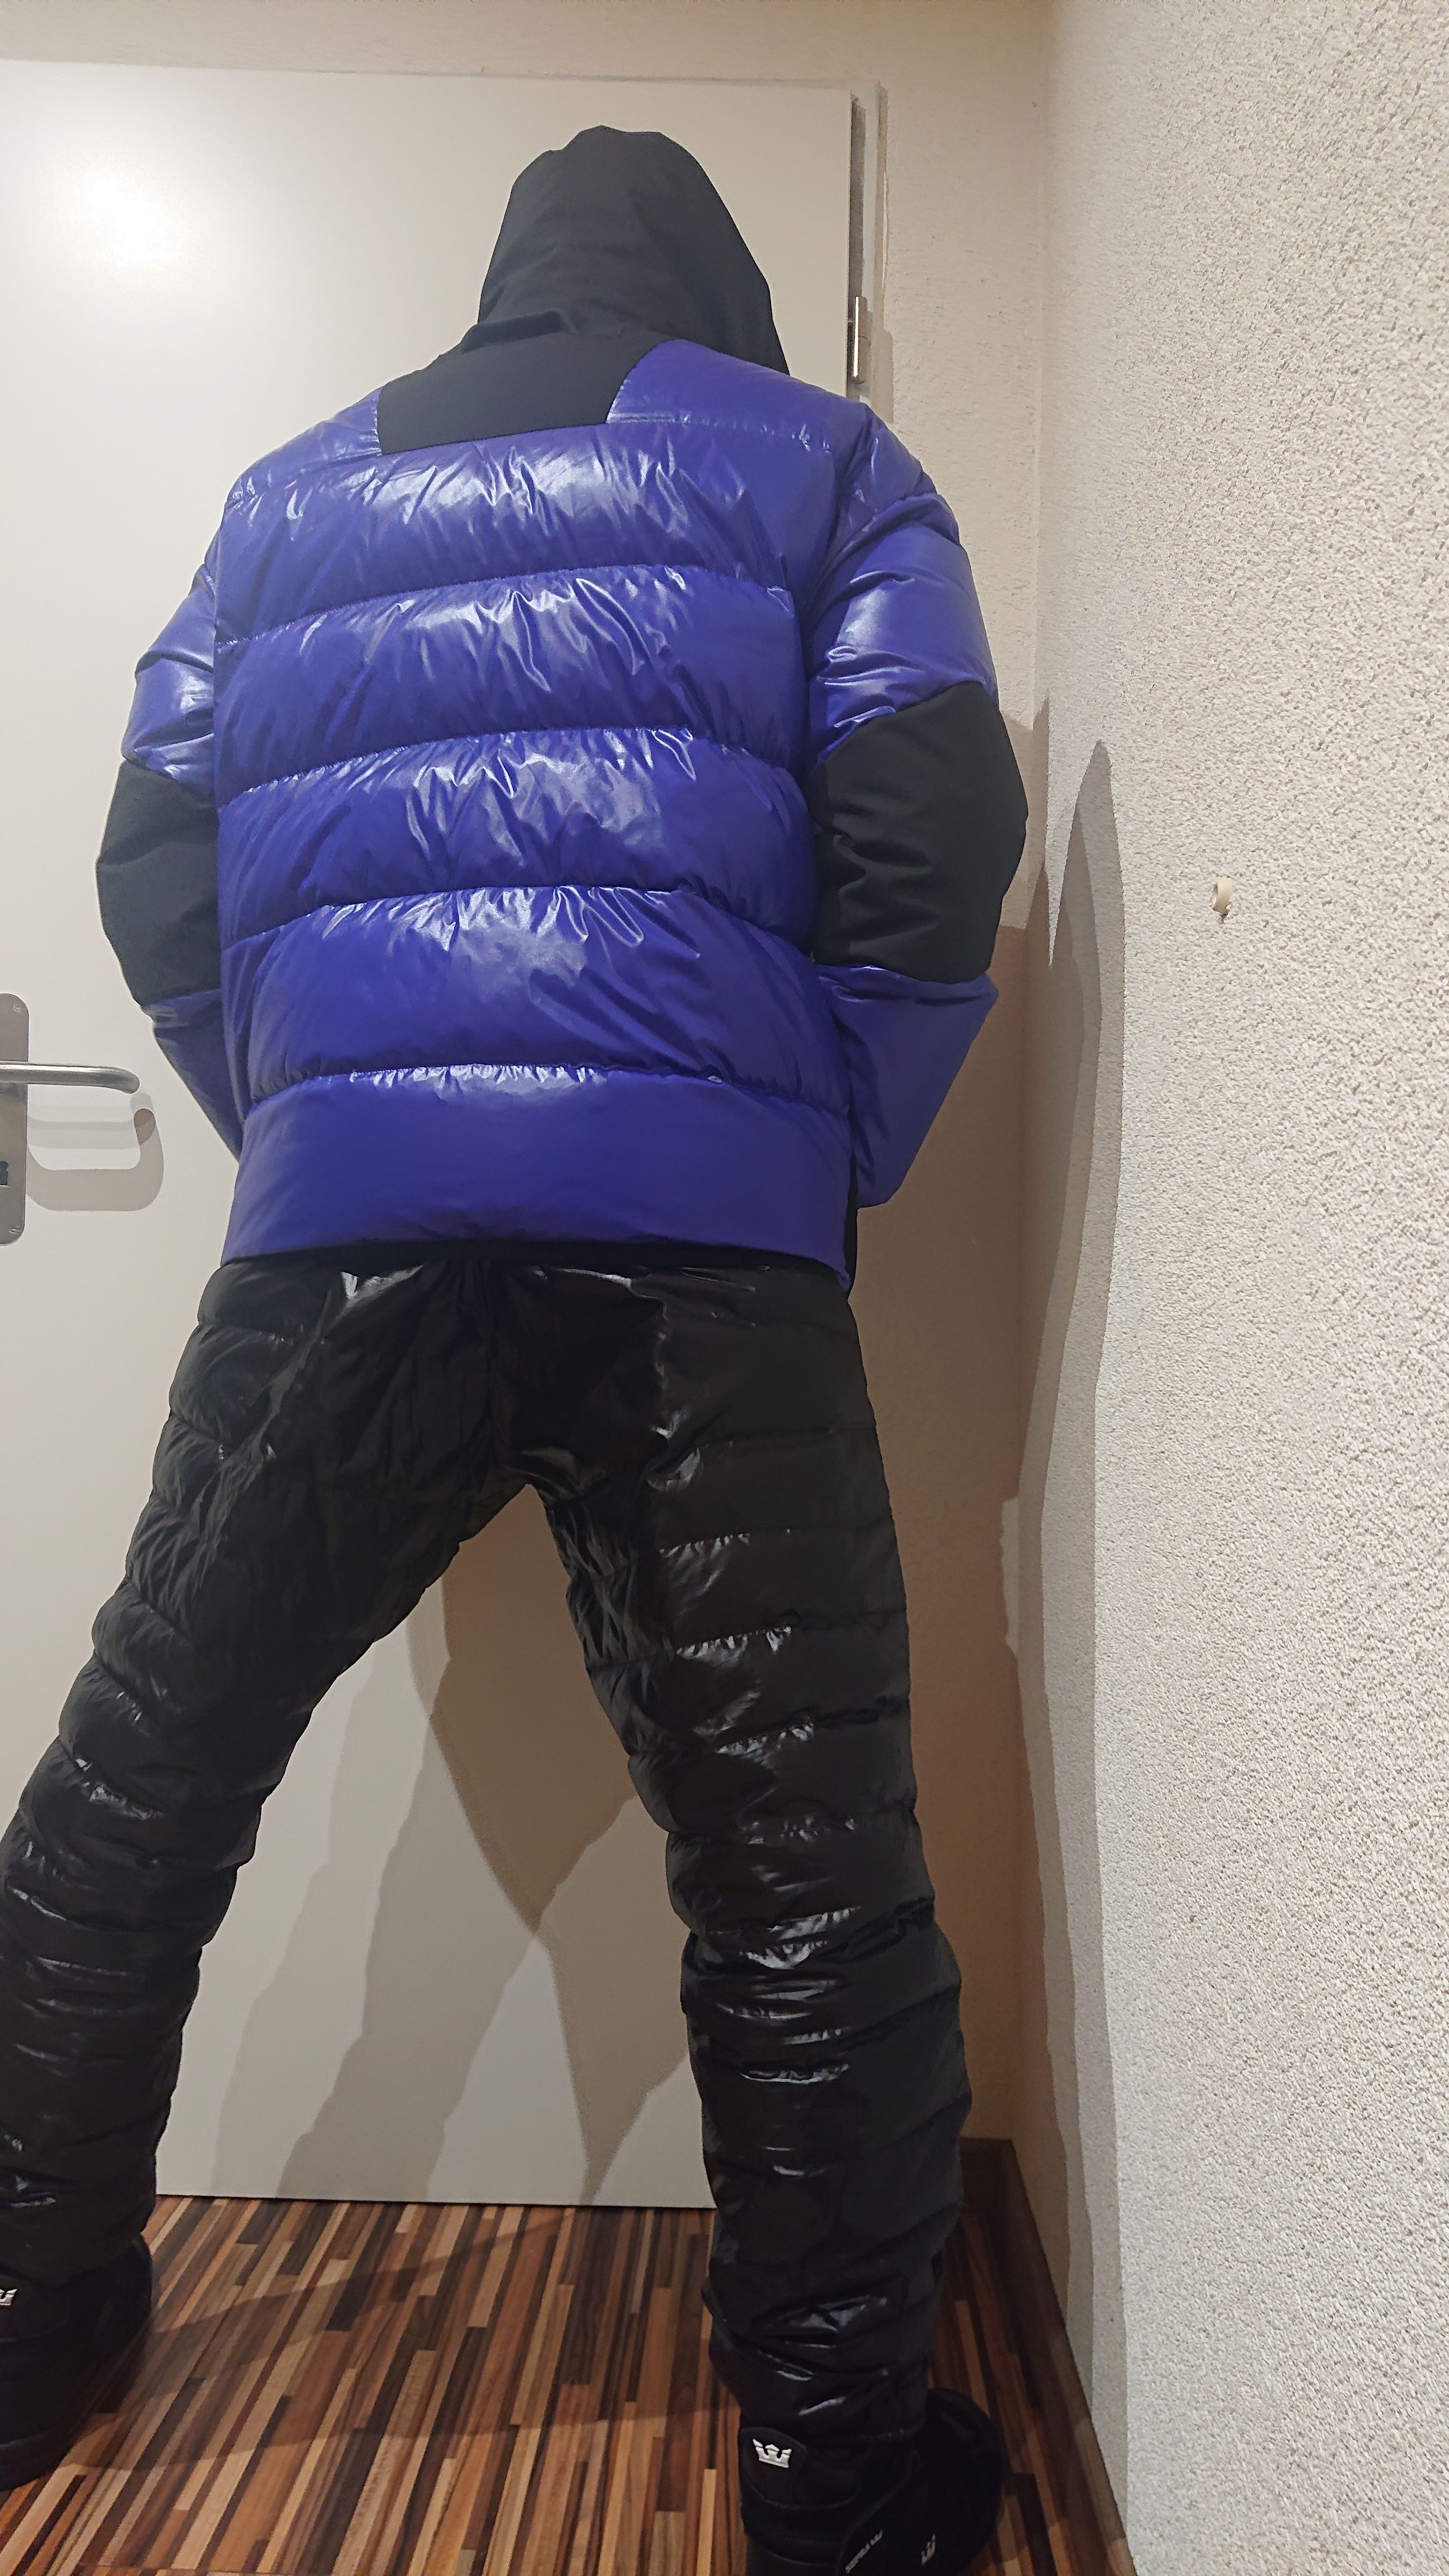 Moncler Grenoble GOLLINGER Jacket and Moncler Genius 2 1952 Quilted Down Pants4.JPG